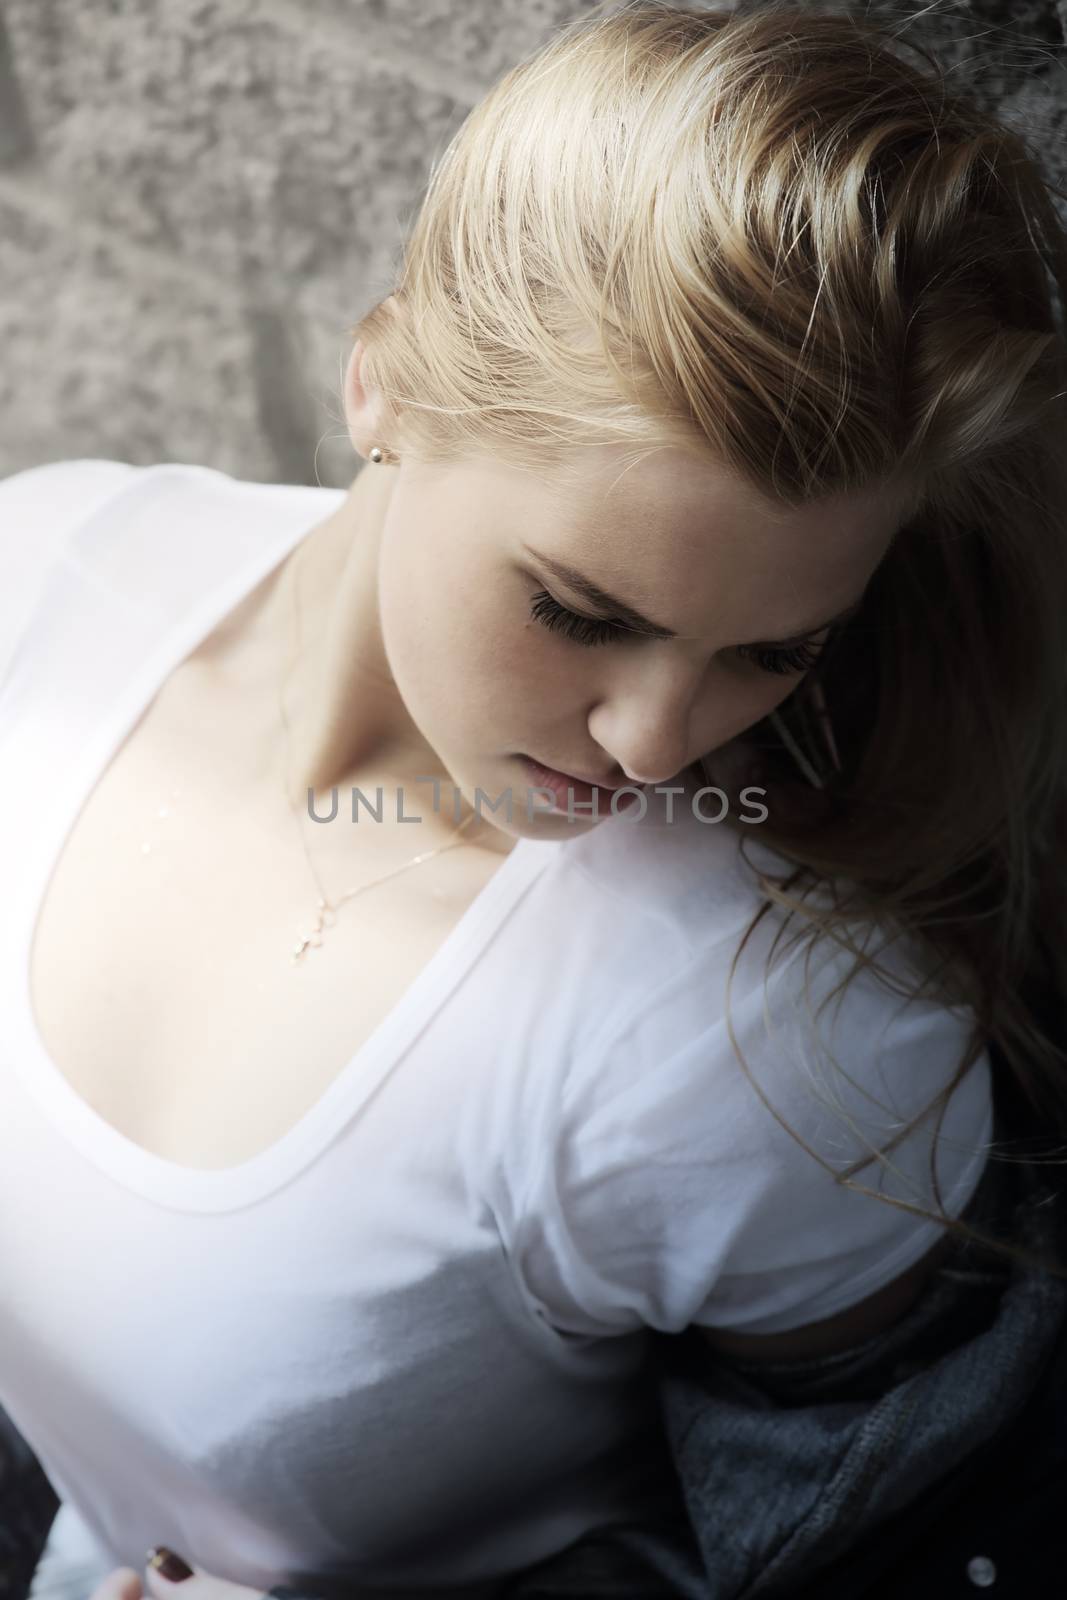 Urban style portrait of young beautiful blond woman in denim